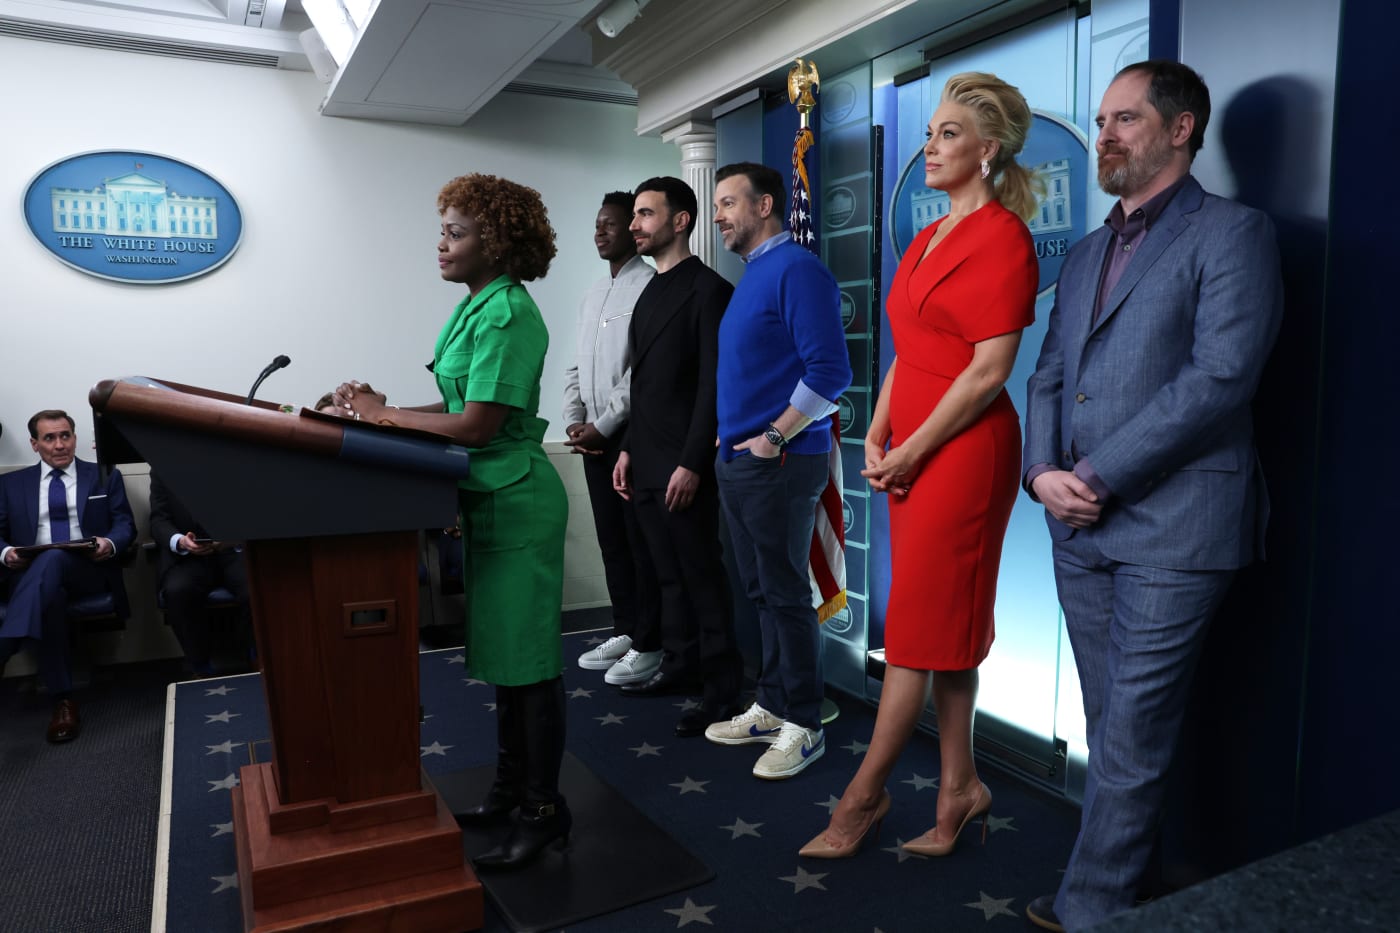 ted lasso cast at the white house